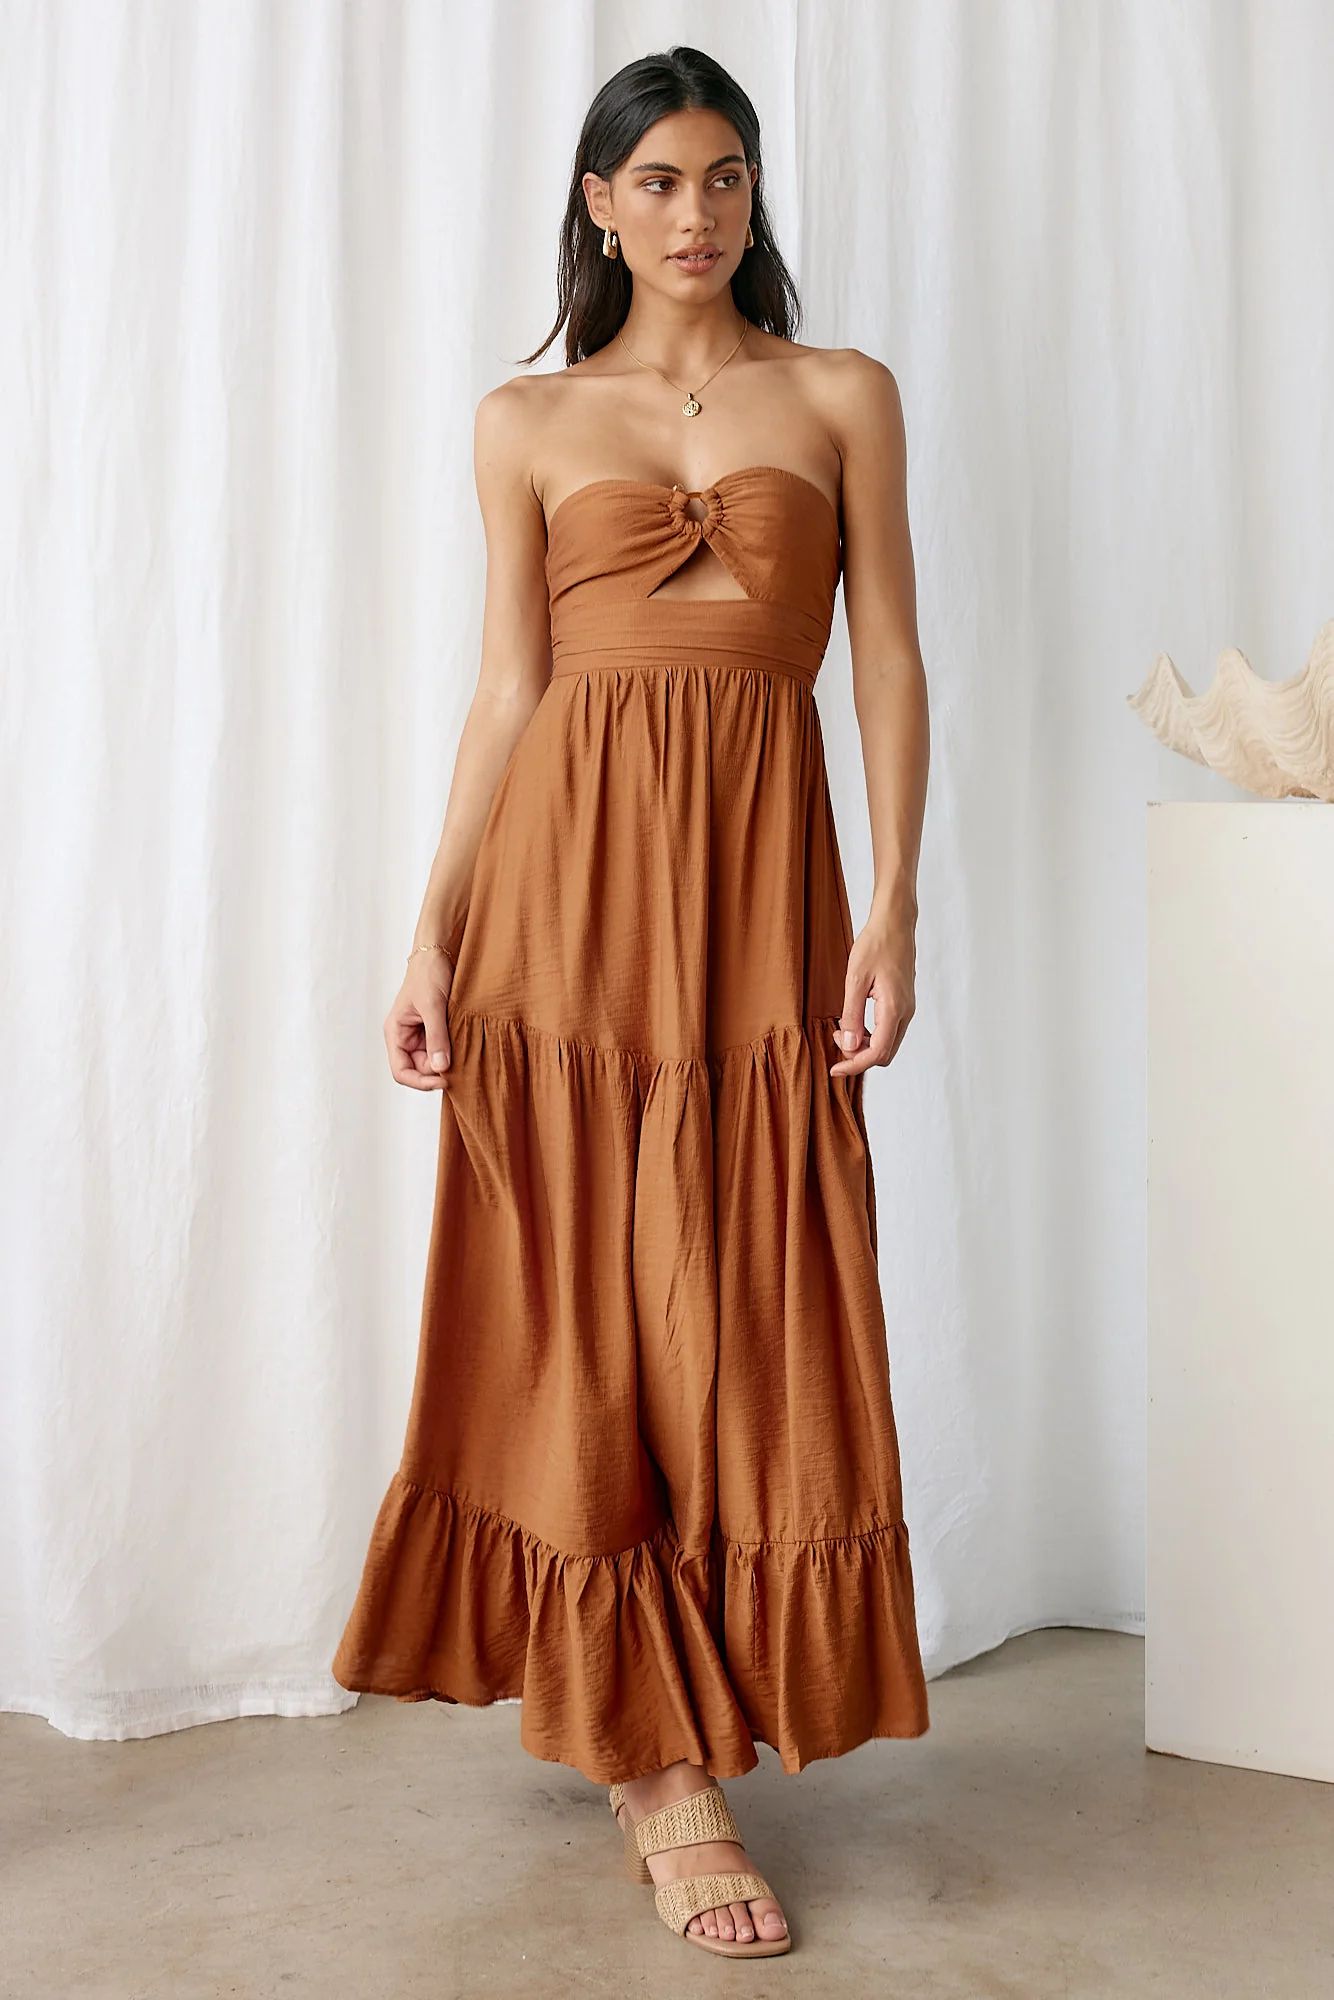 Let's Fly Away Maxi Dress Tan | Fortunate One